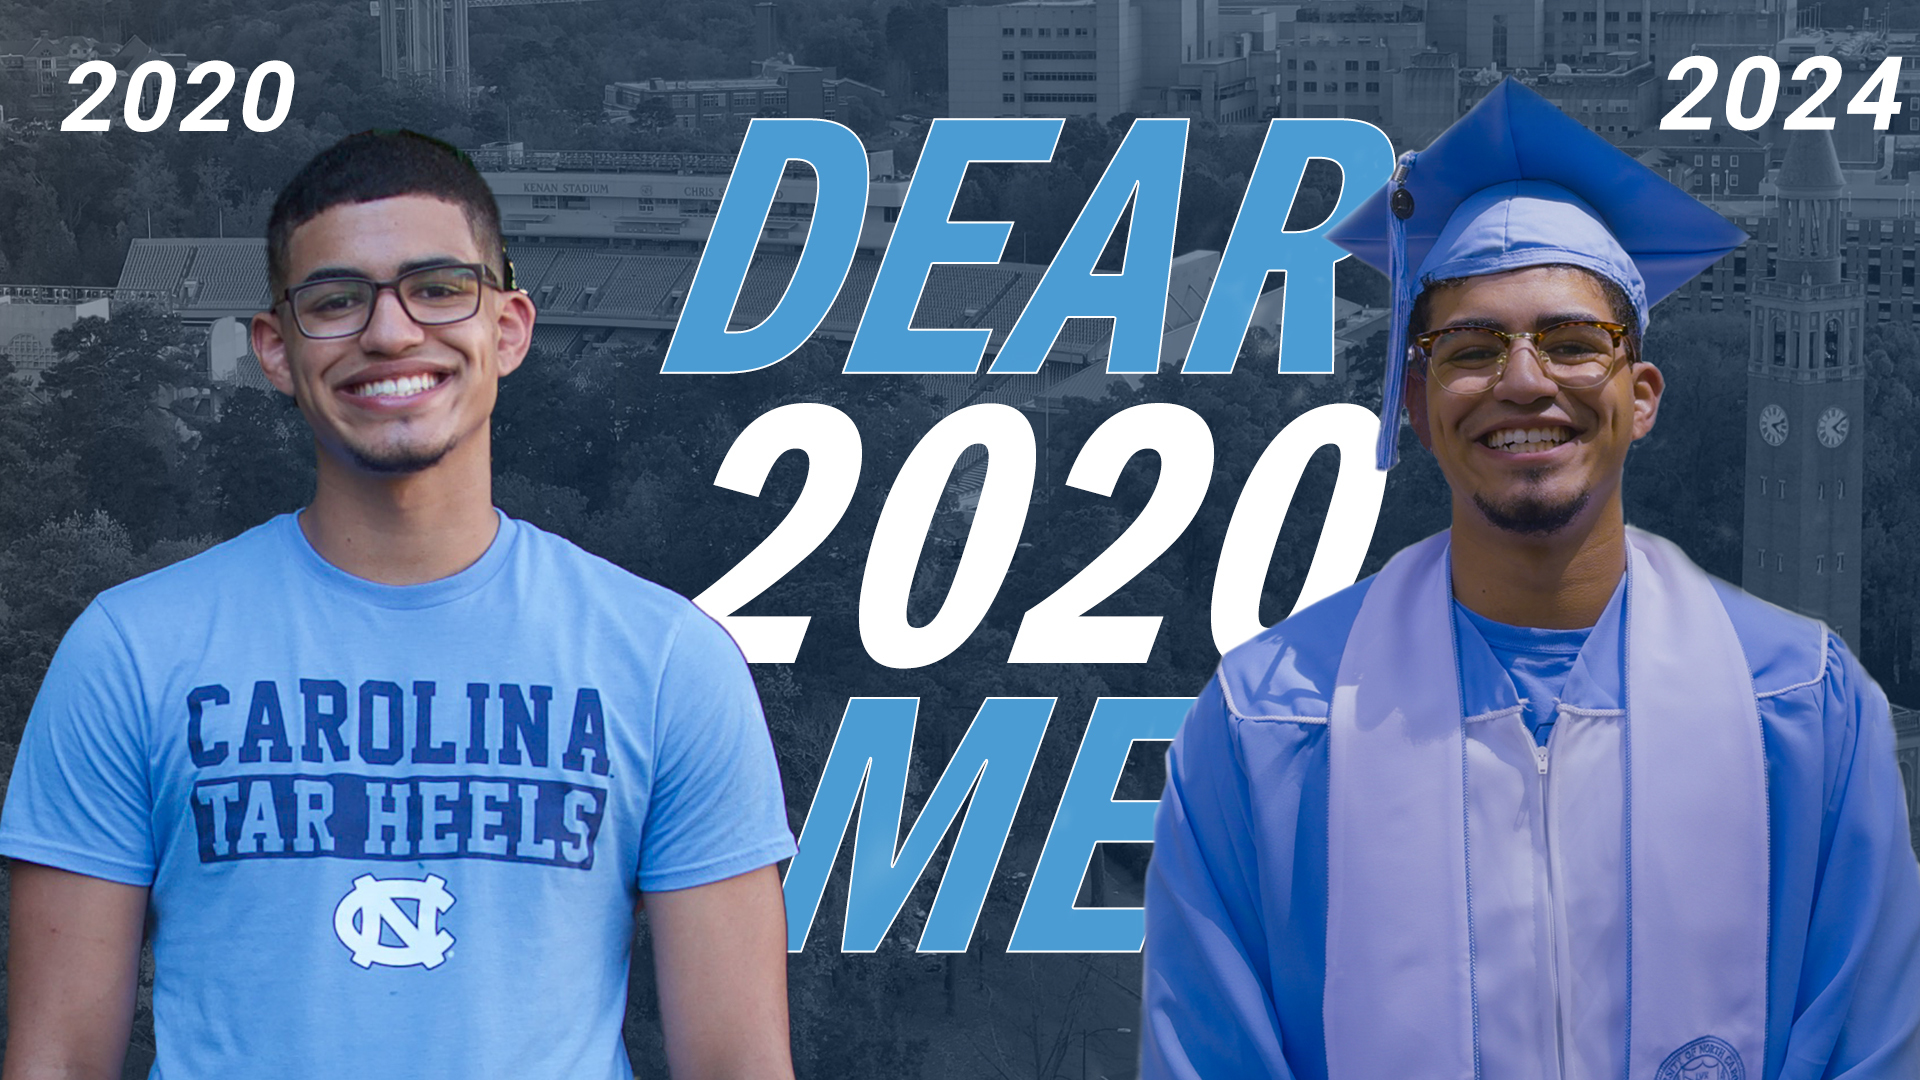 Graphic of Luis Sanchez in Carolina shirt next to Luis in his graduation cap and gown over words 